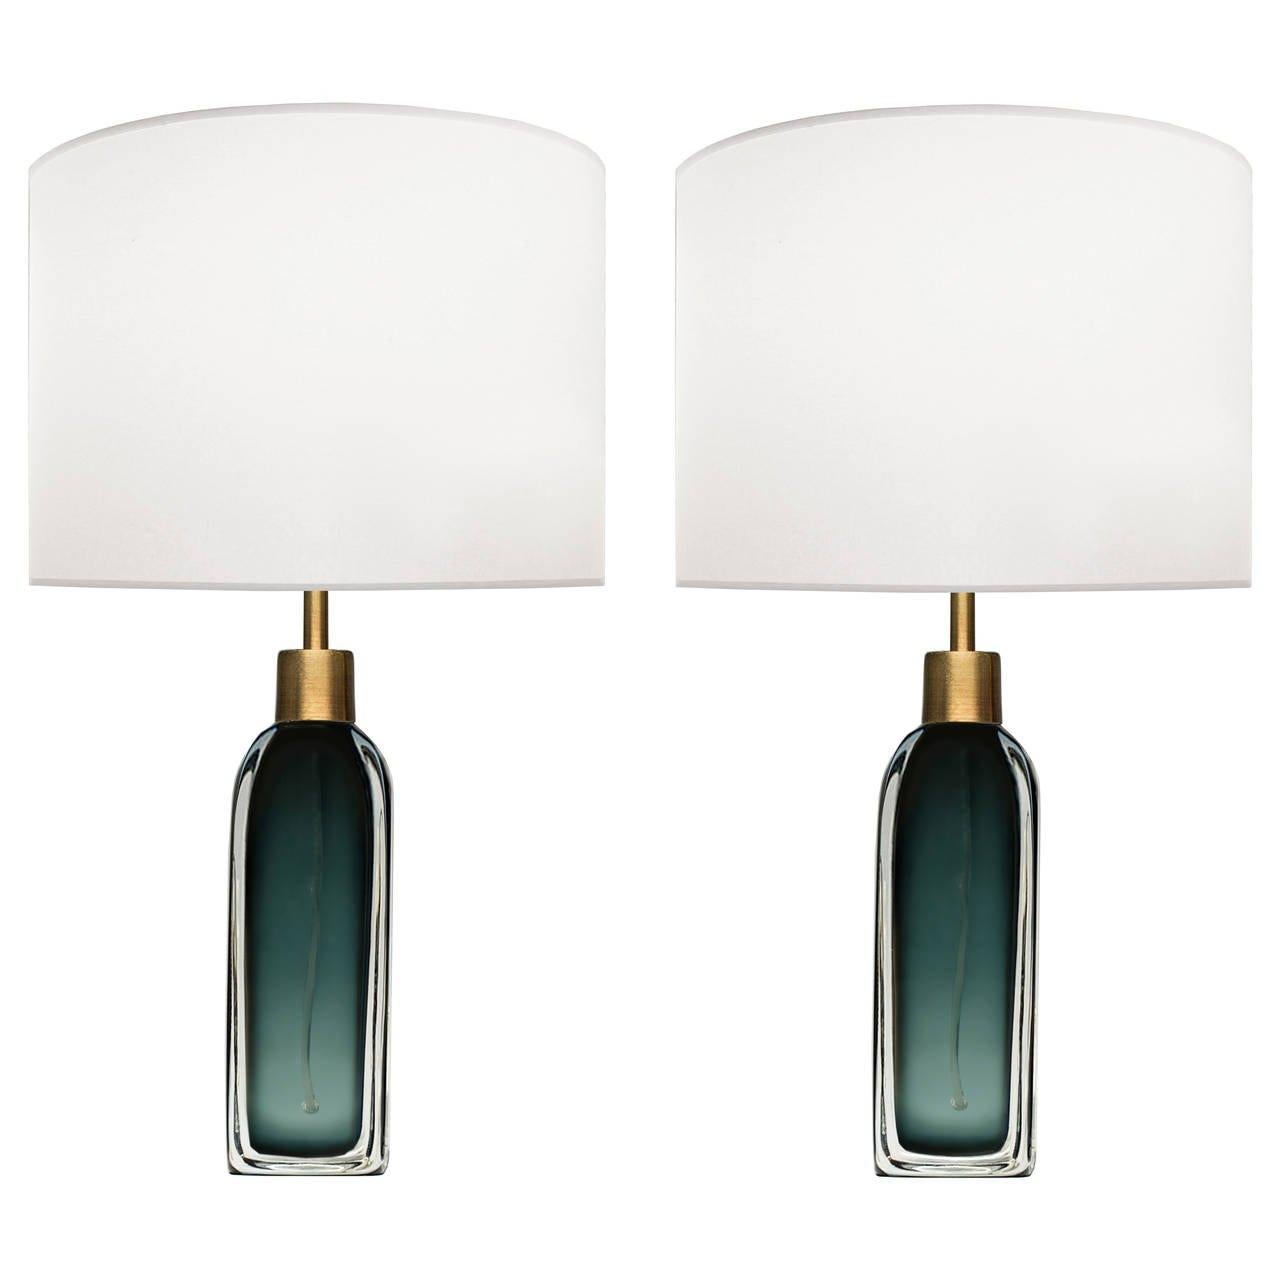 Pair of Nils Landberg for Orrefors Green Glass Lamps In Excellent Condition For Sale In New York, NY